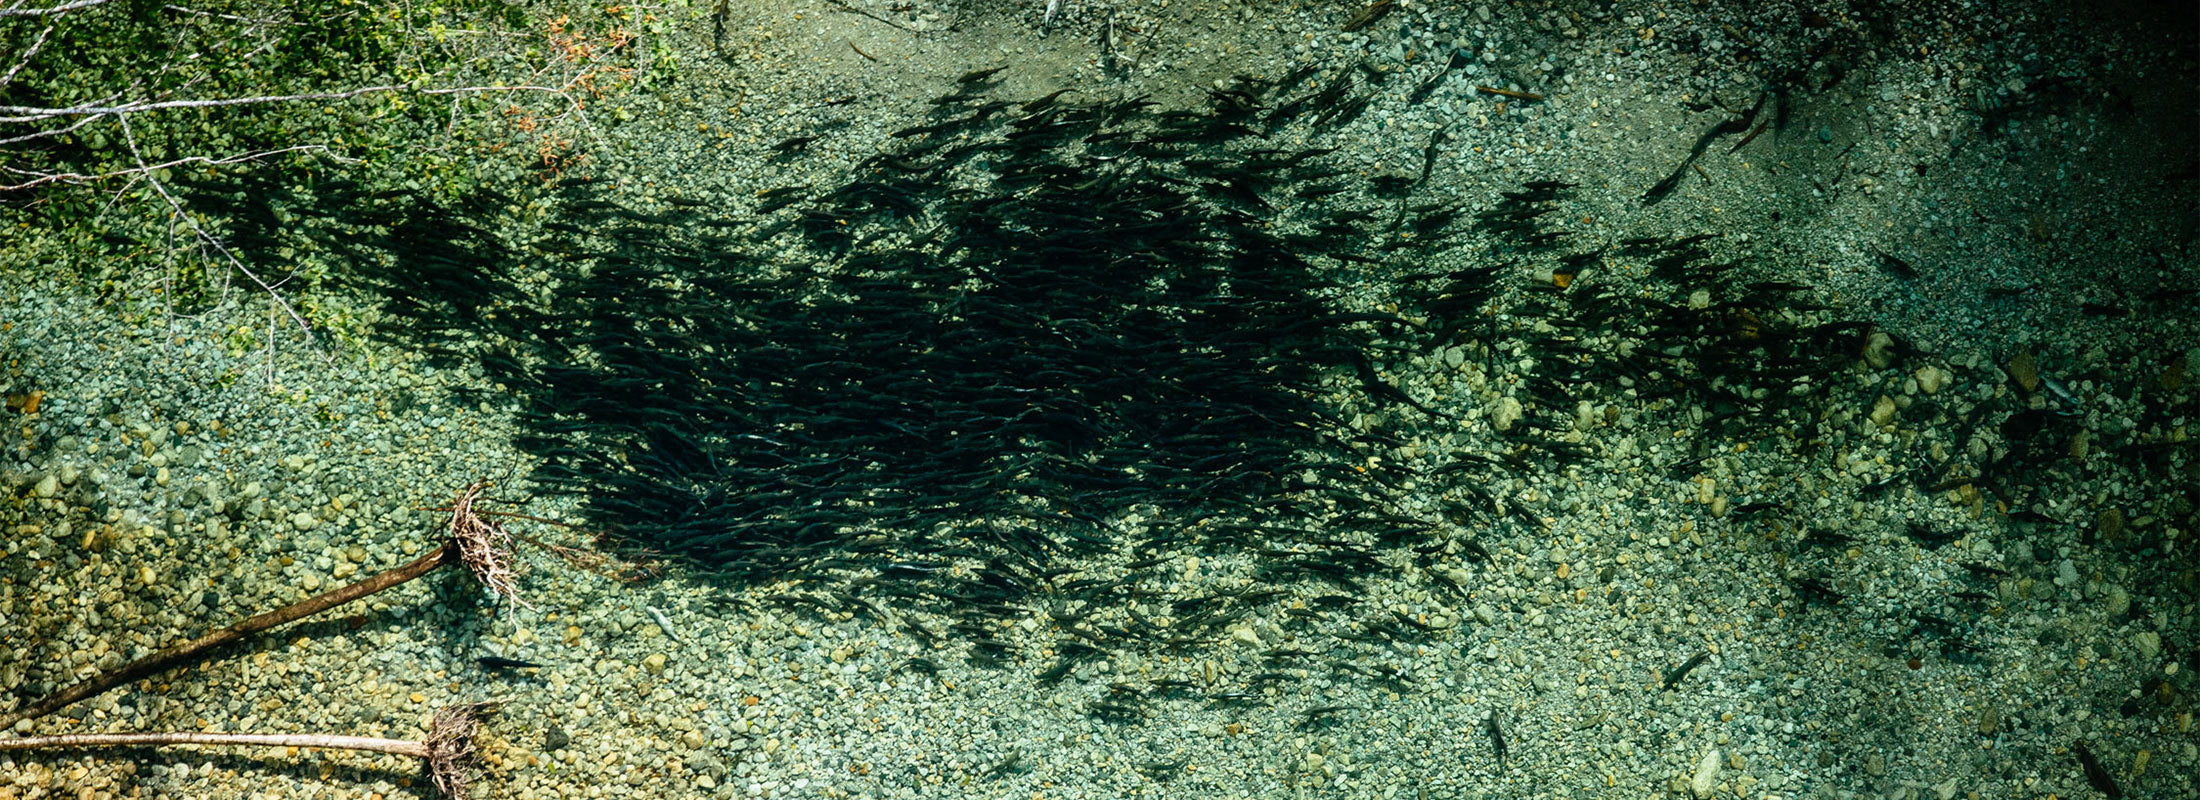 An aerial photograph of a school of Wild Pink Salmon dark against green water